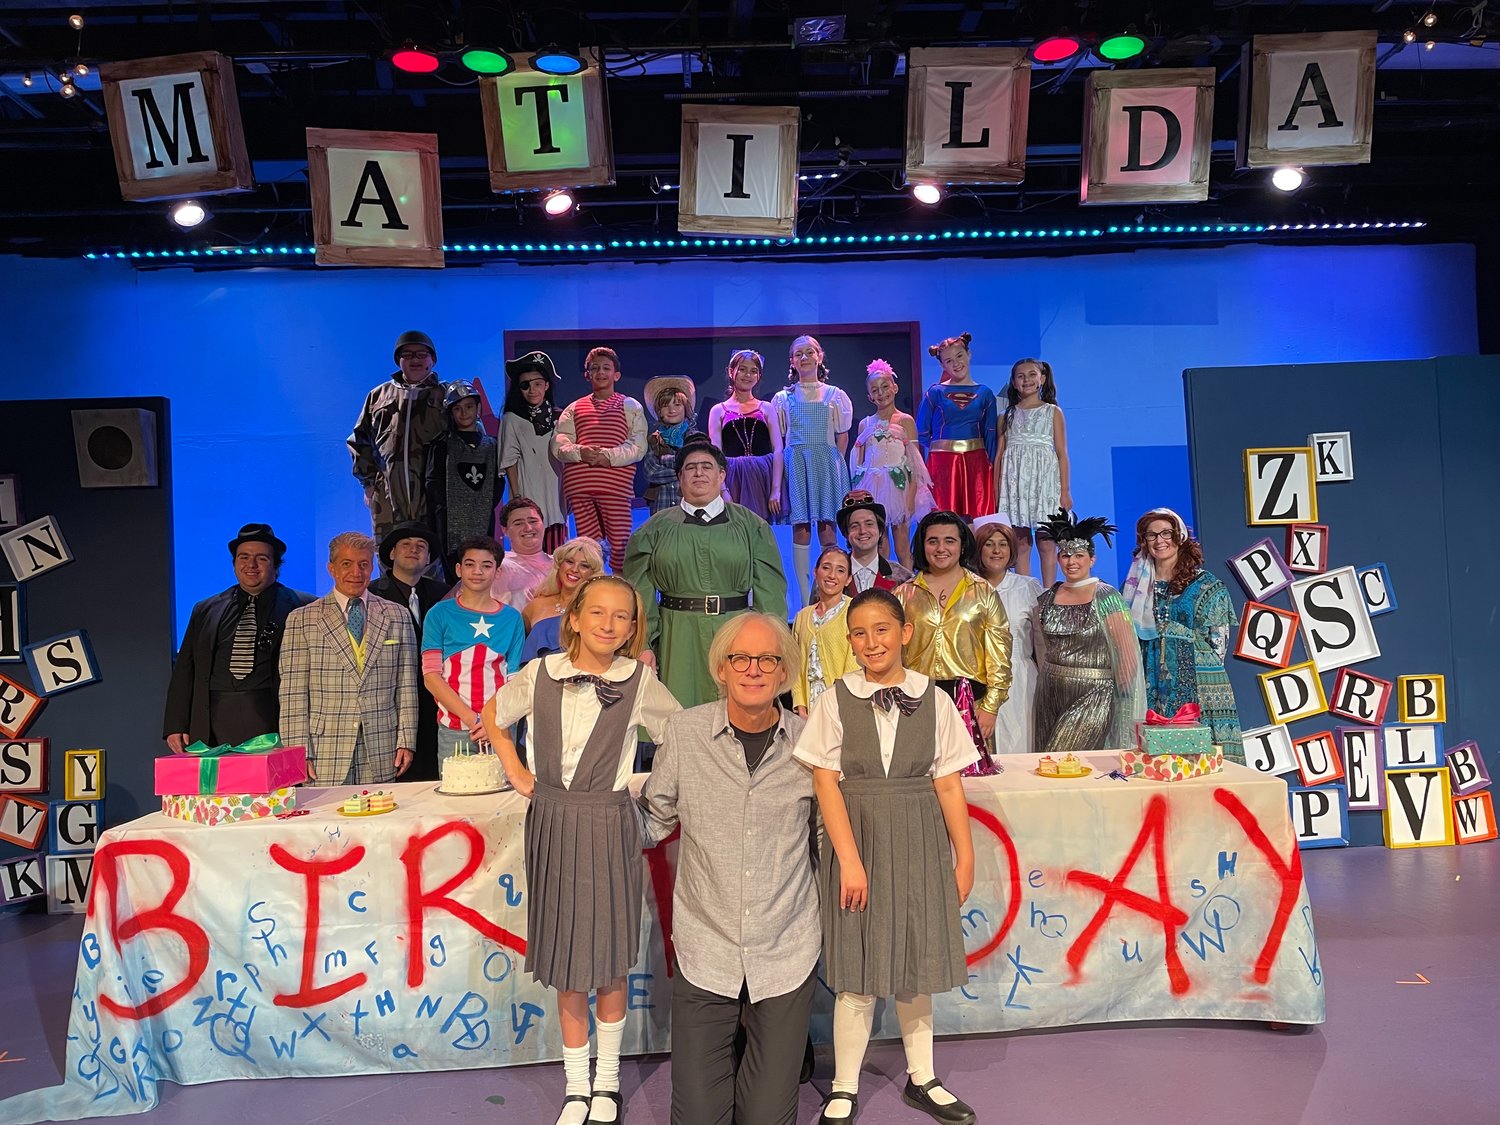 Tarmo Kirsimäe, bottom center, joined the cast of the musical ‘Matilda,’ based on the novel by Roald Dahl. The musical and its venue, Merrick Theatre & Center for the Arts, won Broadway World accolades.